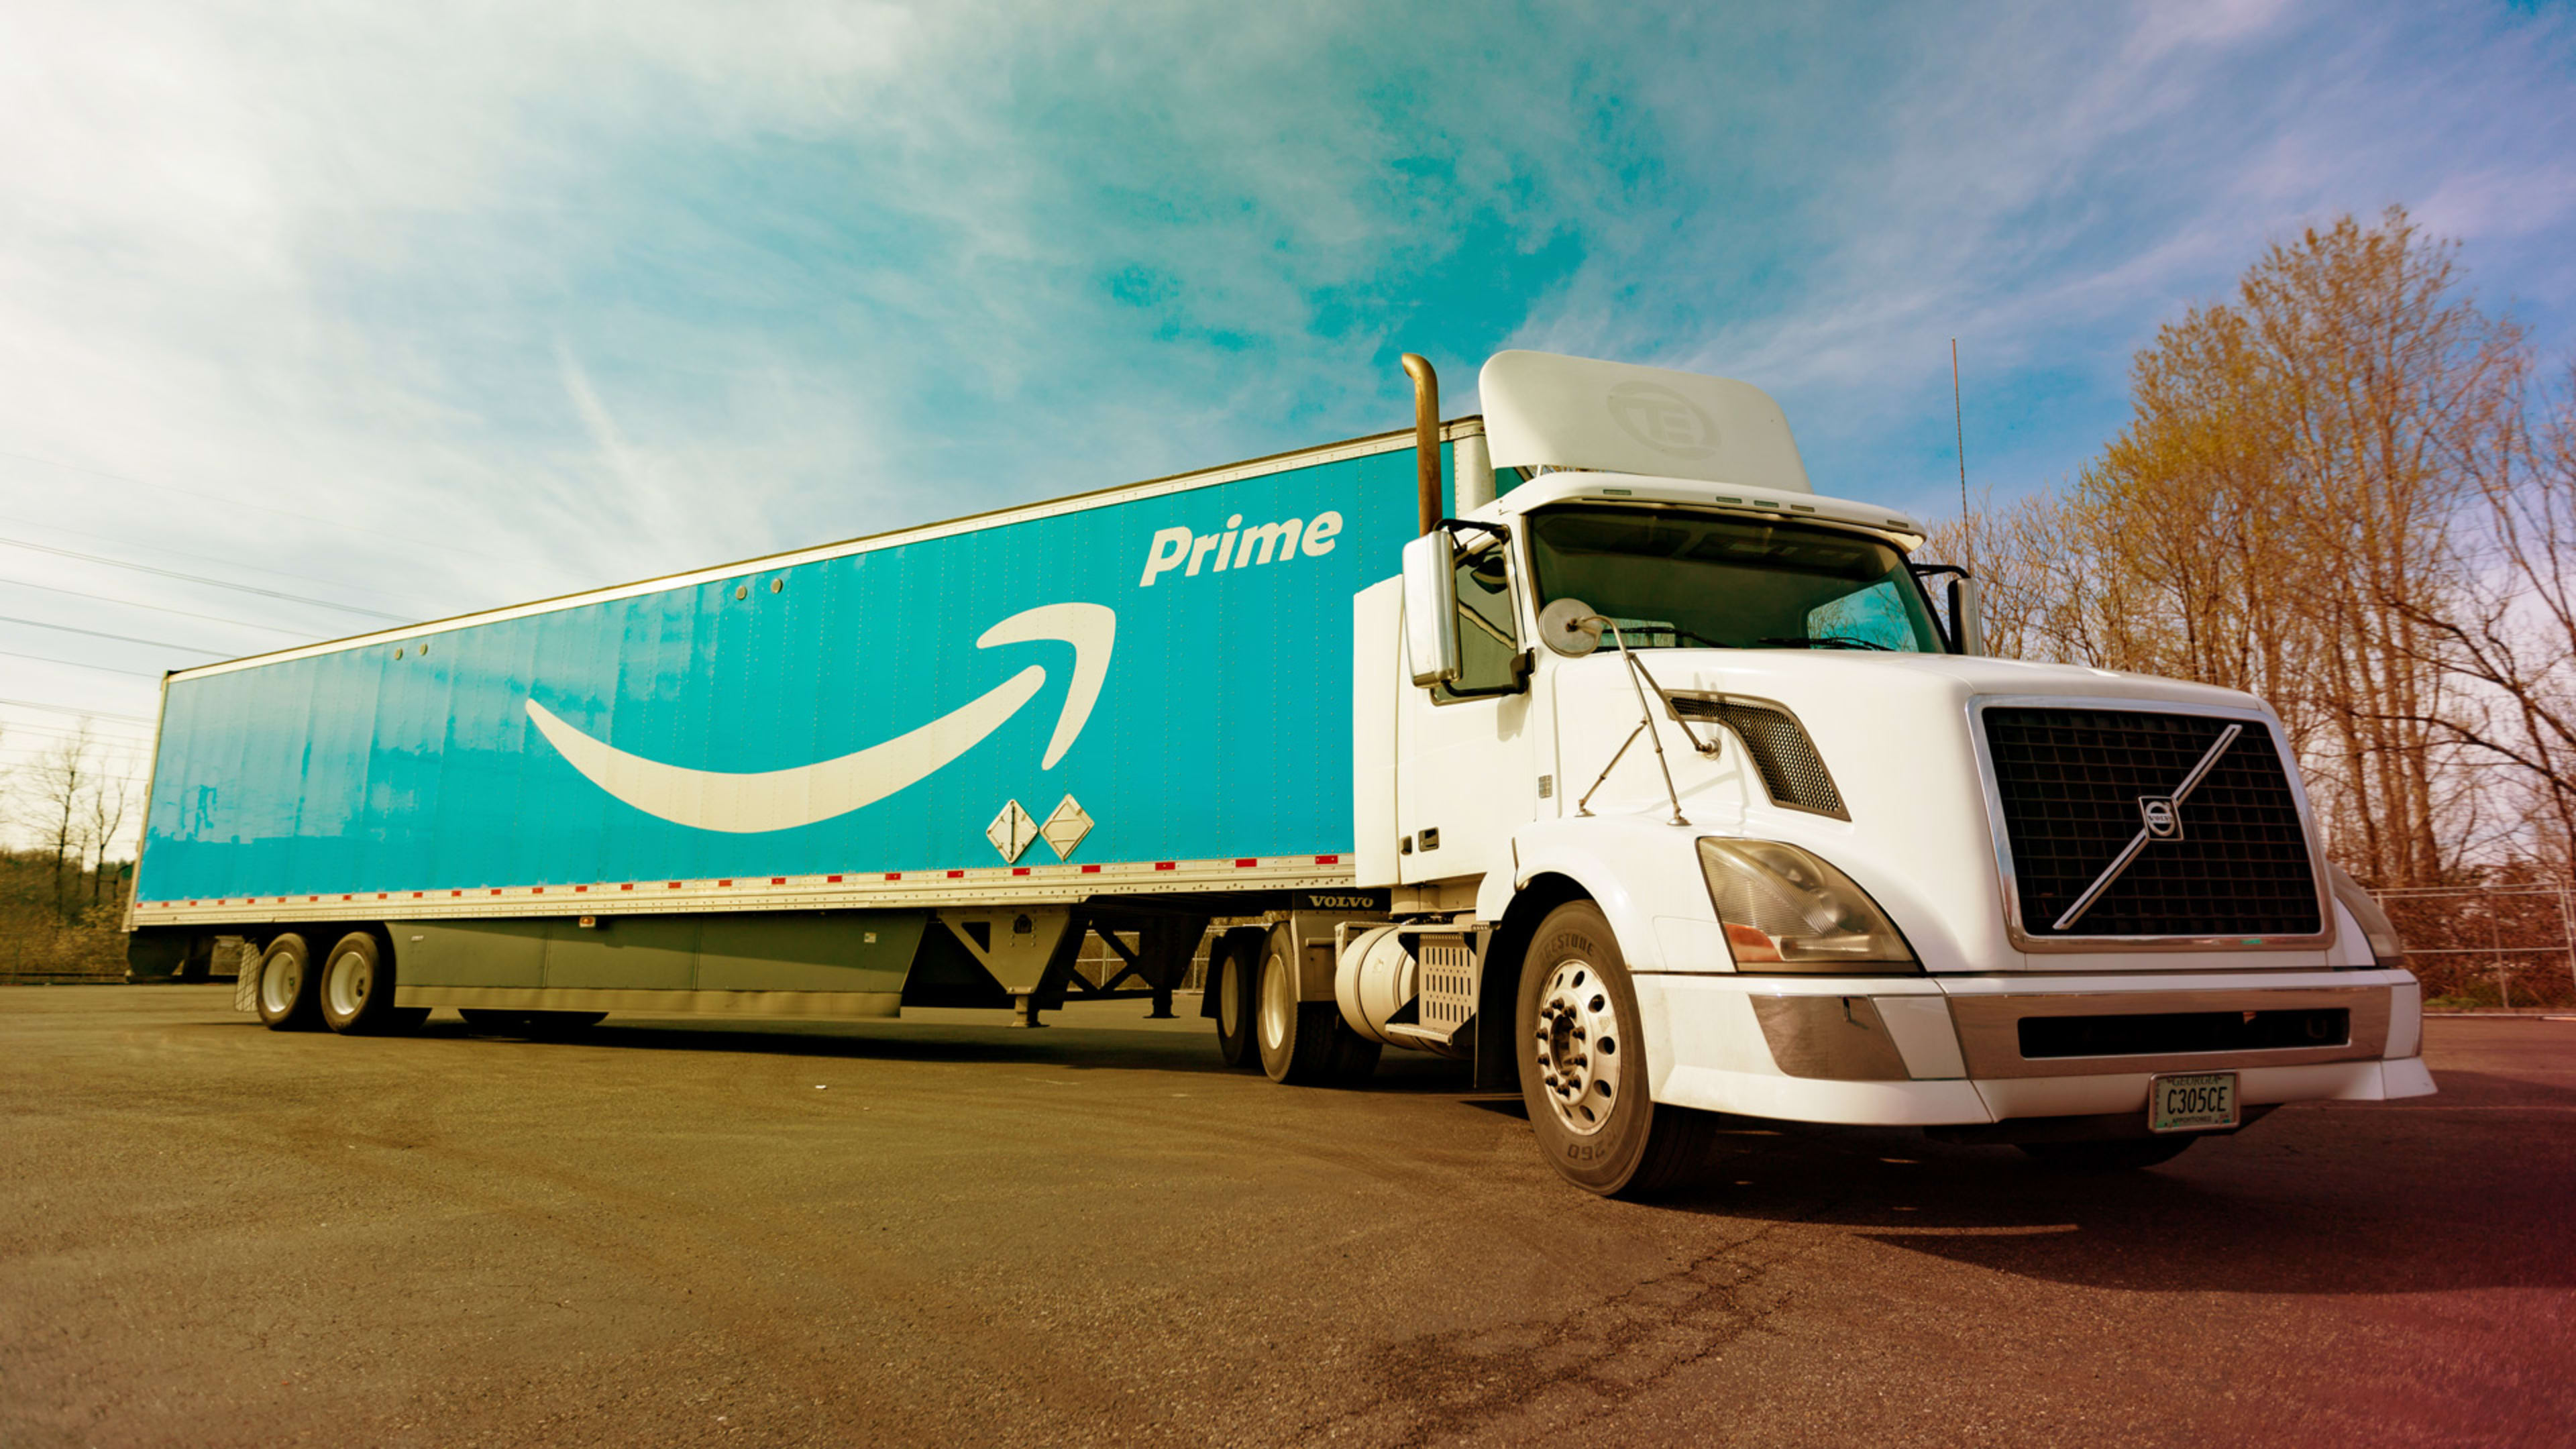 Amazon has sold Prime memberships to 100 million of us